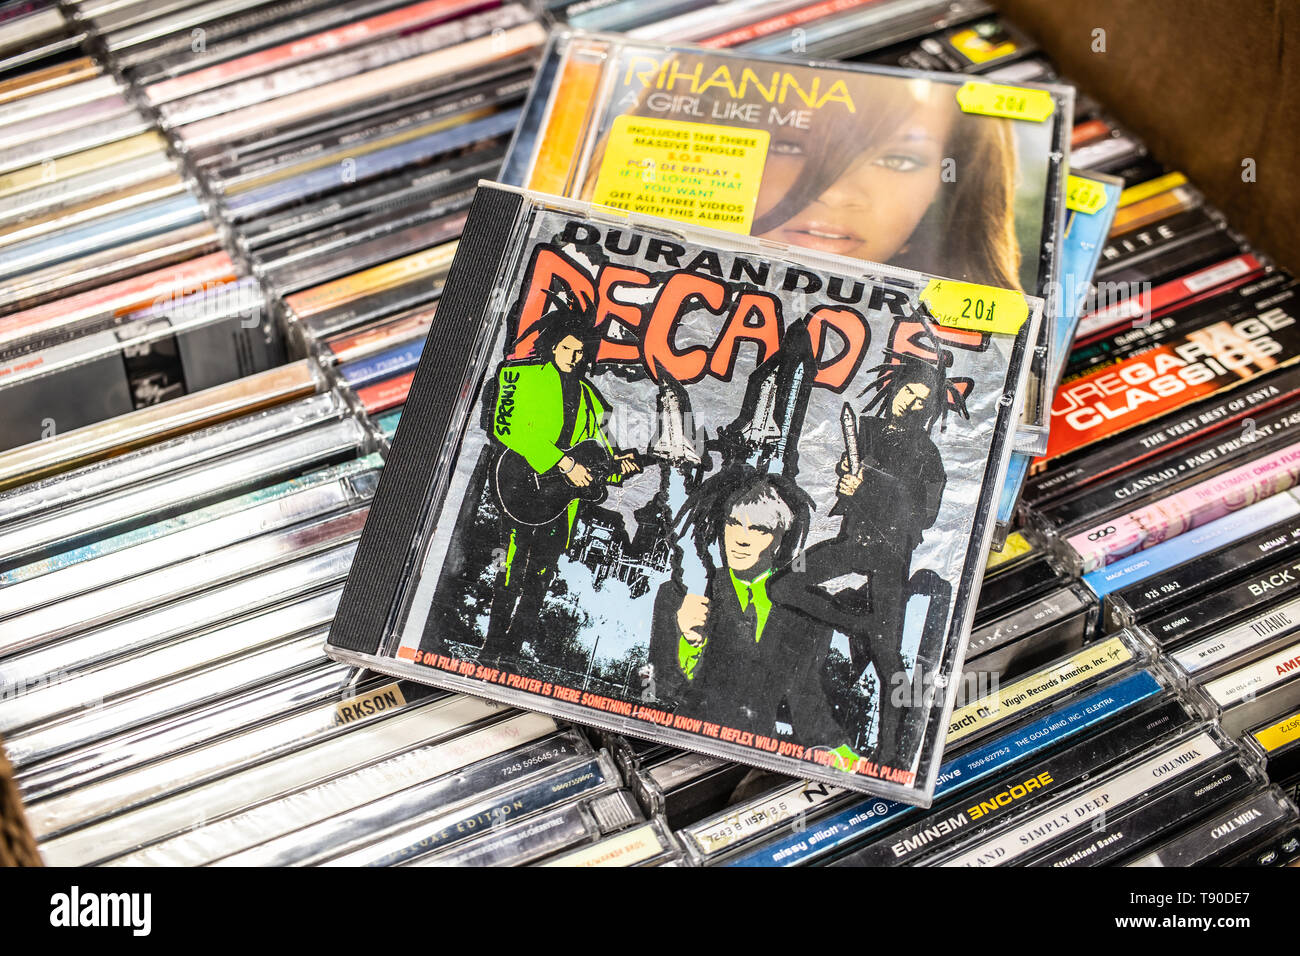 Nadarzyn, Poland, May 11, 2019: Duran Duran CD album Decade: Greatest Hits on display for sale, famous English new wave band, collection of CD music Stock Photo